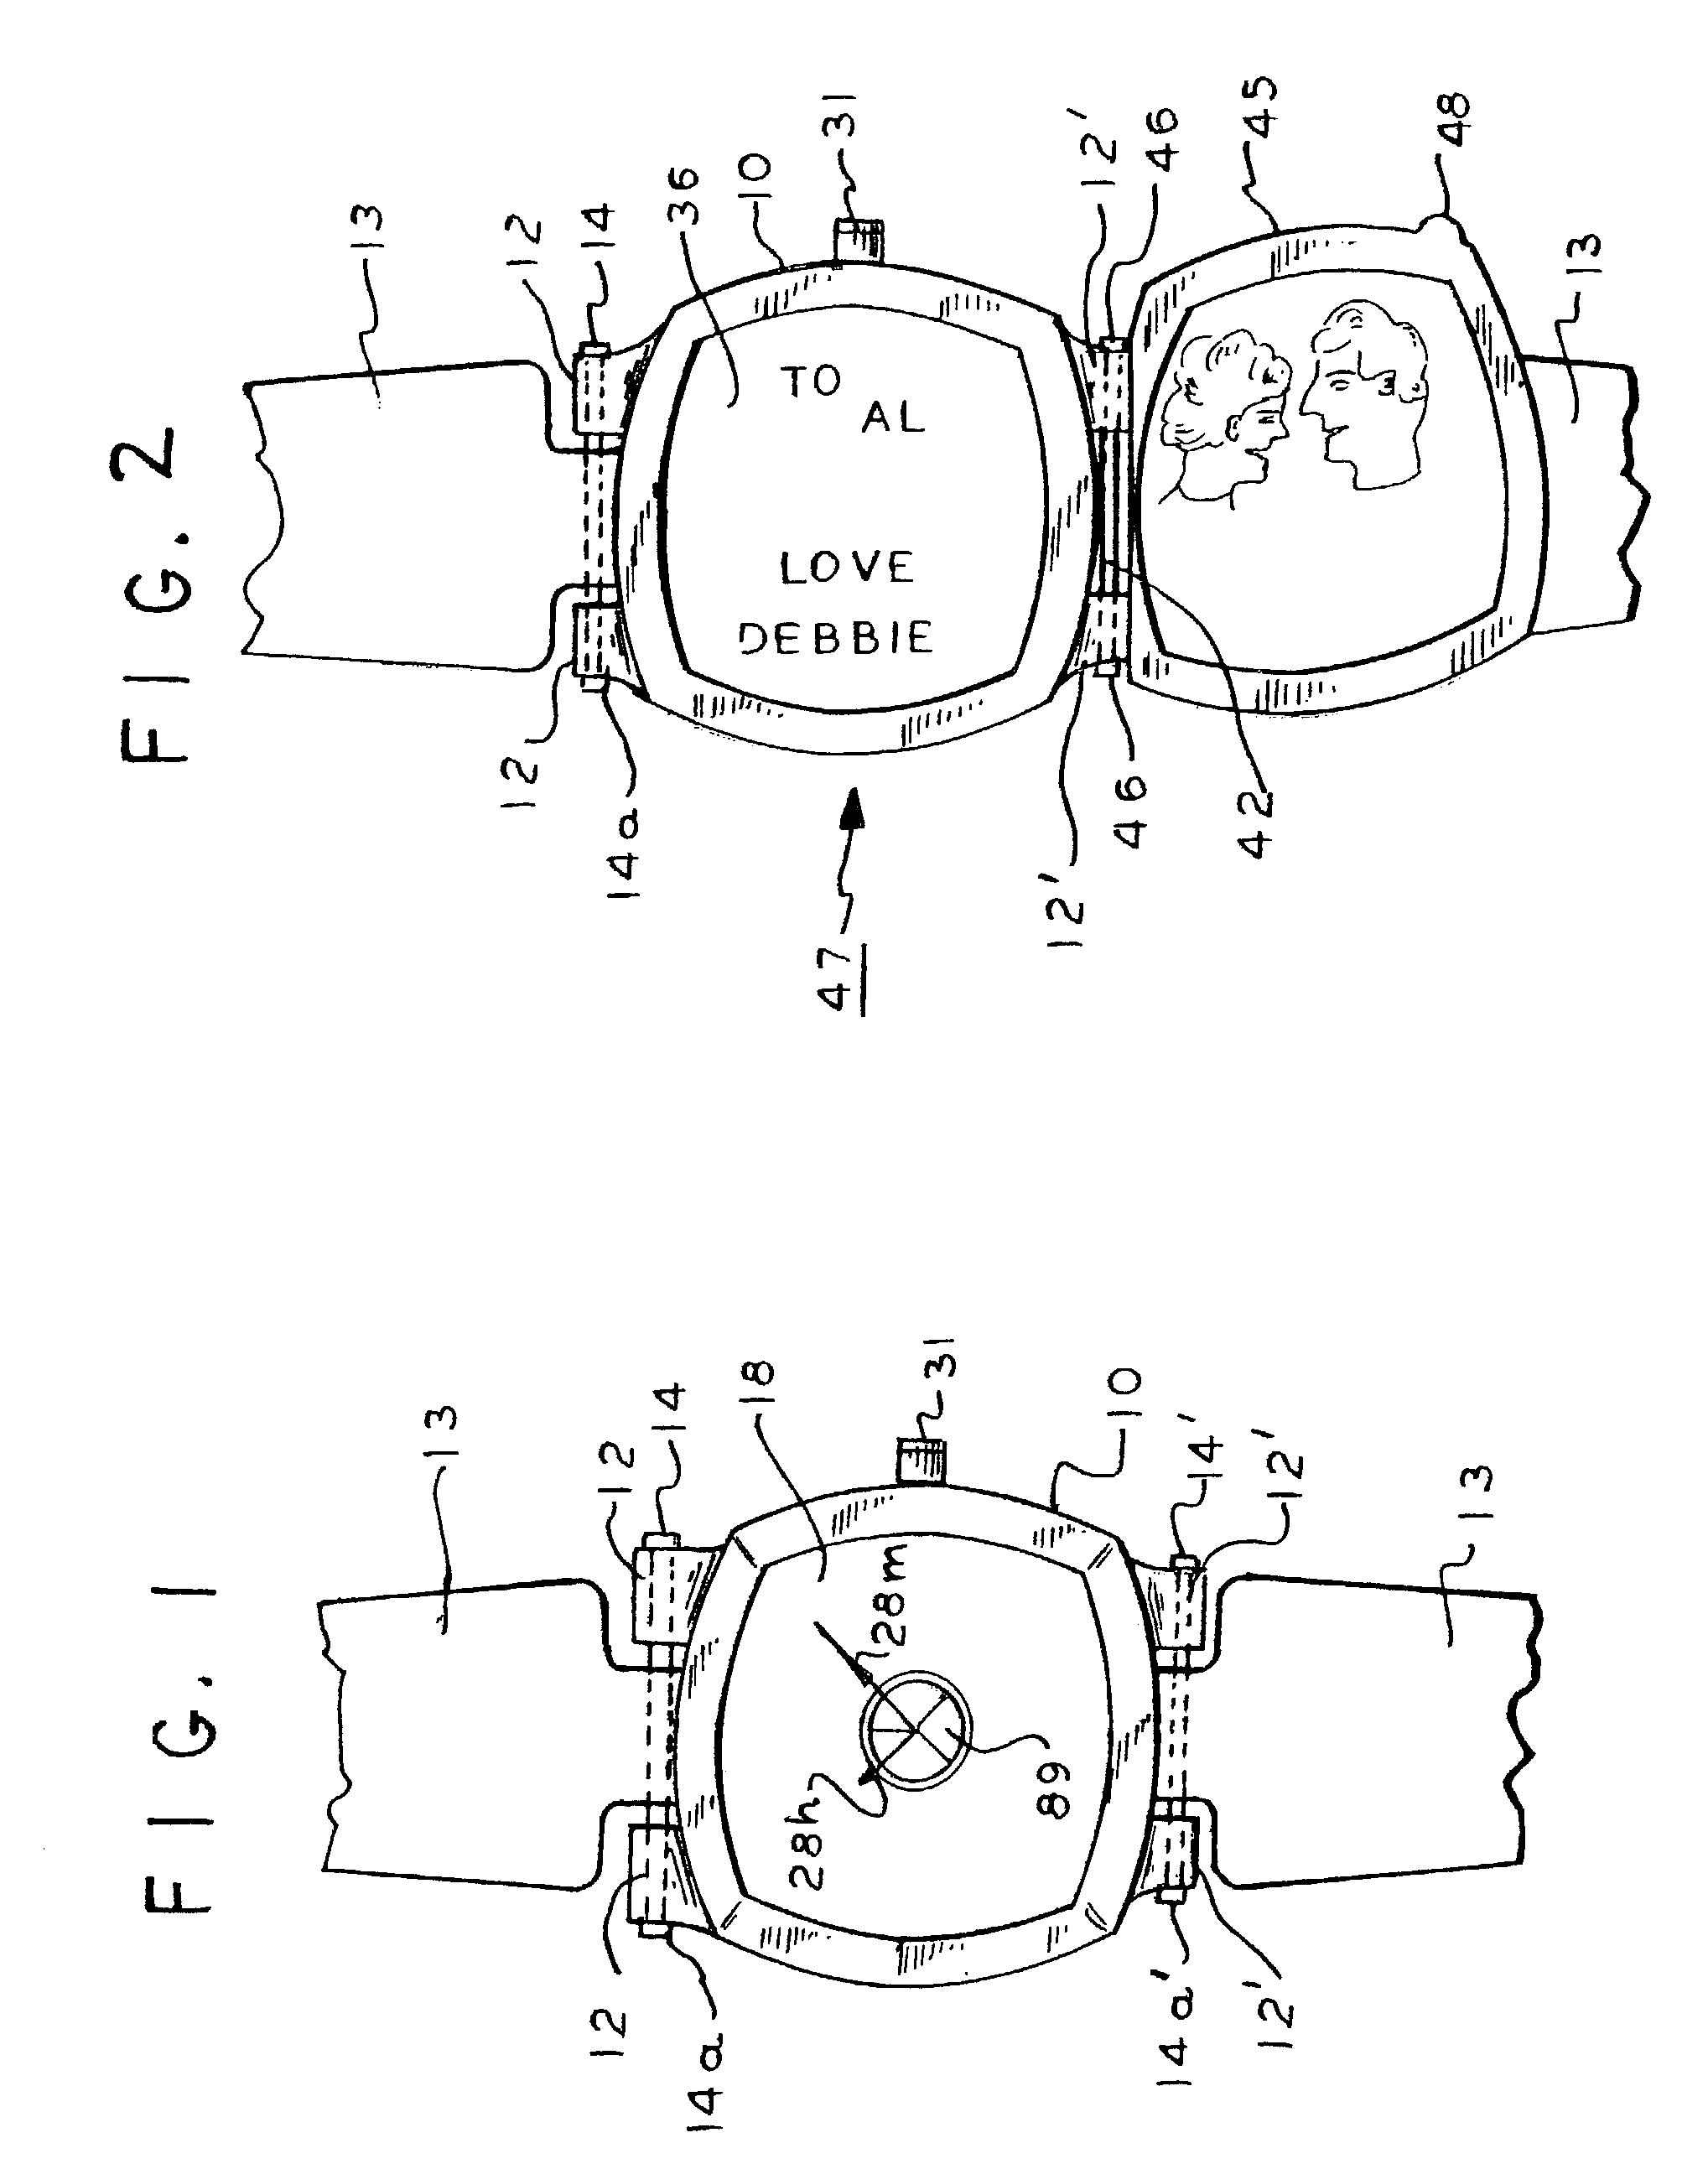 Apparatus for setting gems and providing hidden compartments in a timepiece